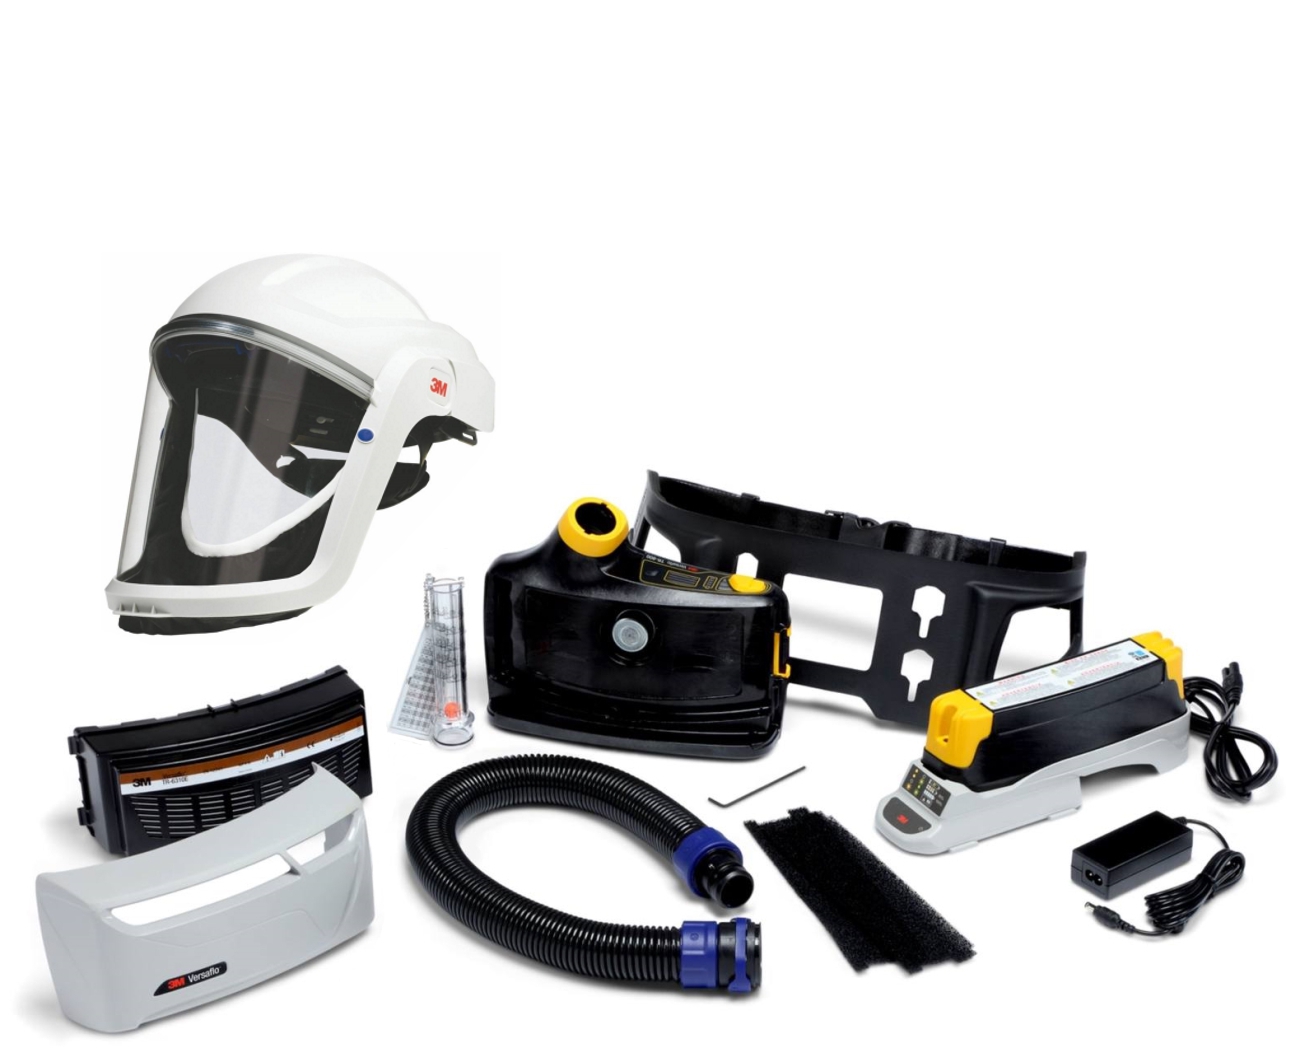 3M TR-819E IS Versaflo starter pack explosion protection incl. TR-802E, accessories and 3M Versaflo Safety helmet M206 with comfort face seal and polycarbonate visor, clear